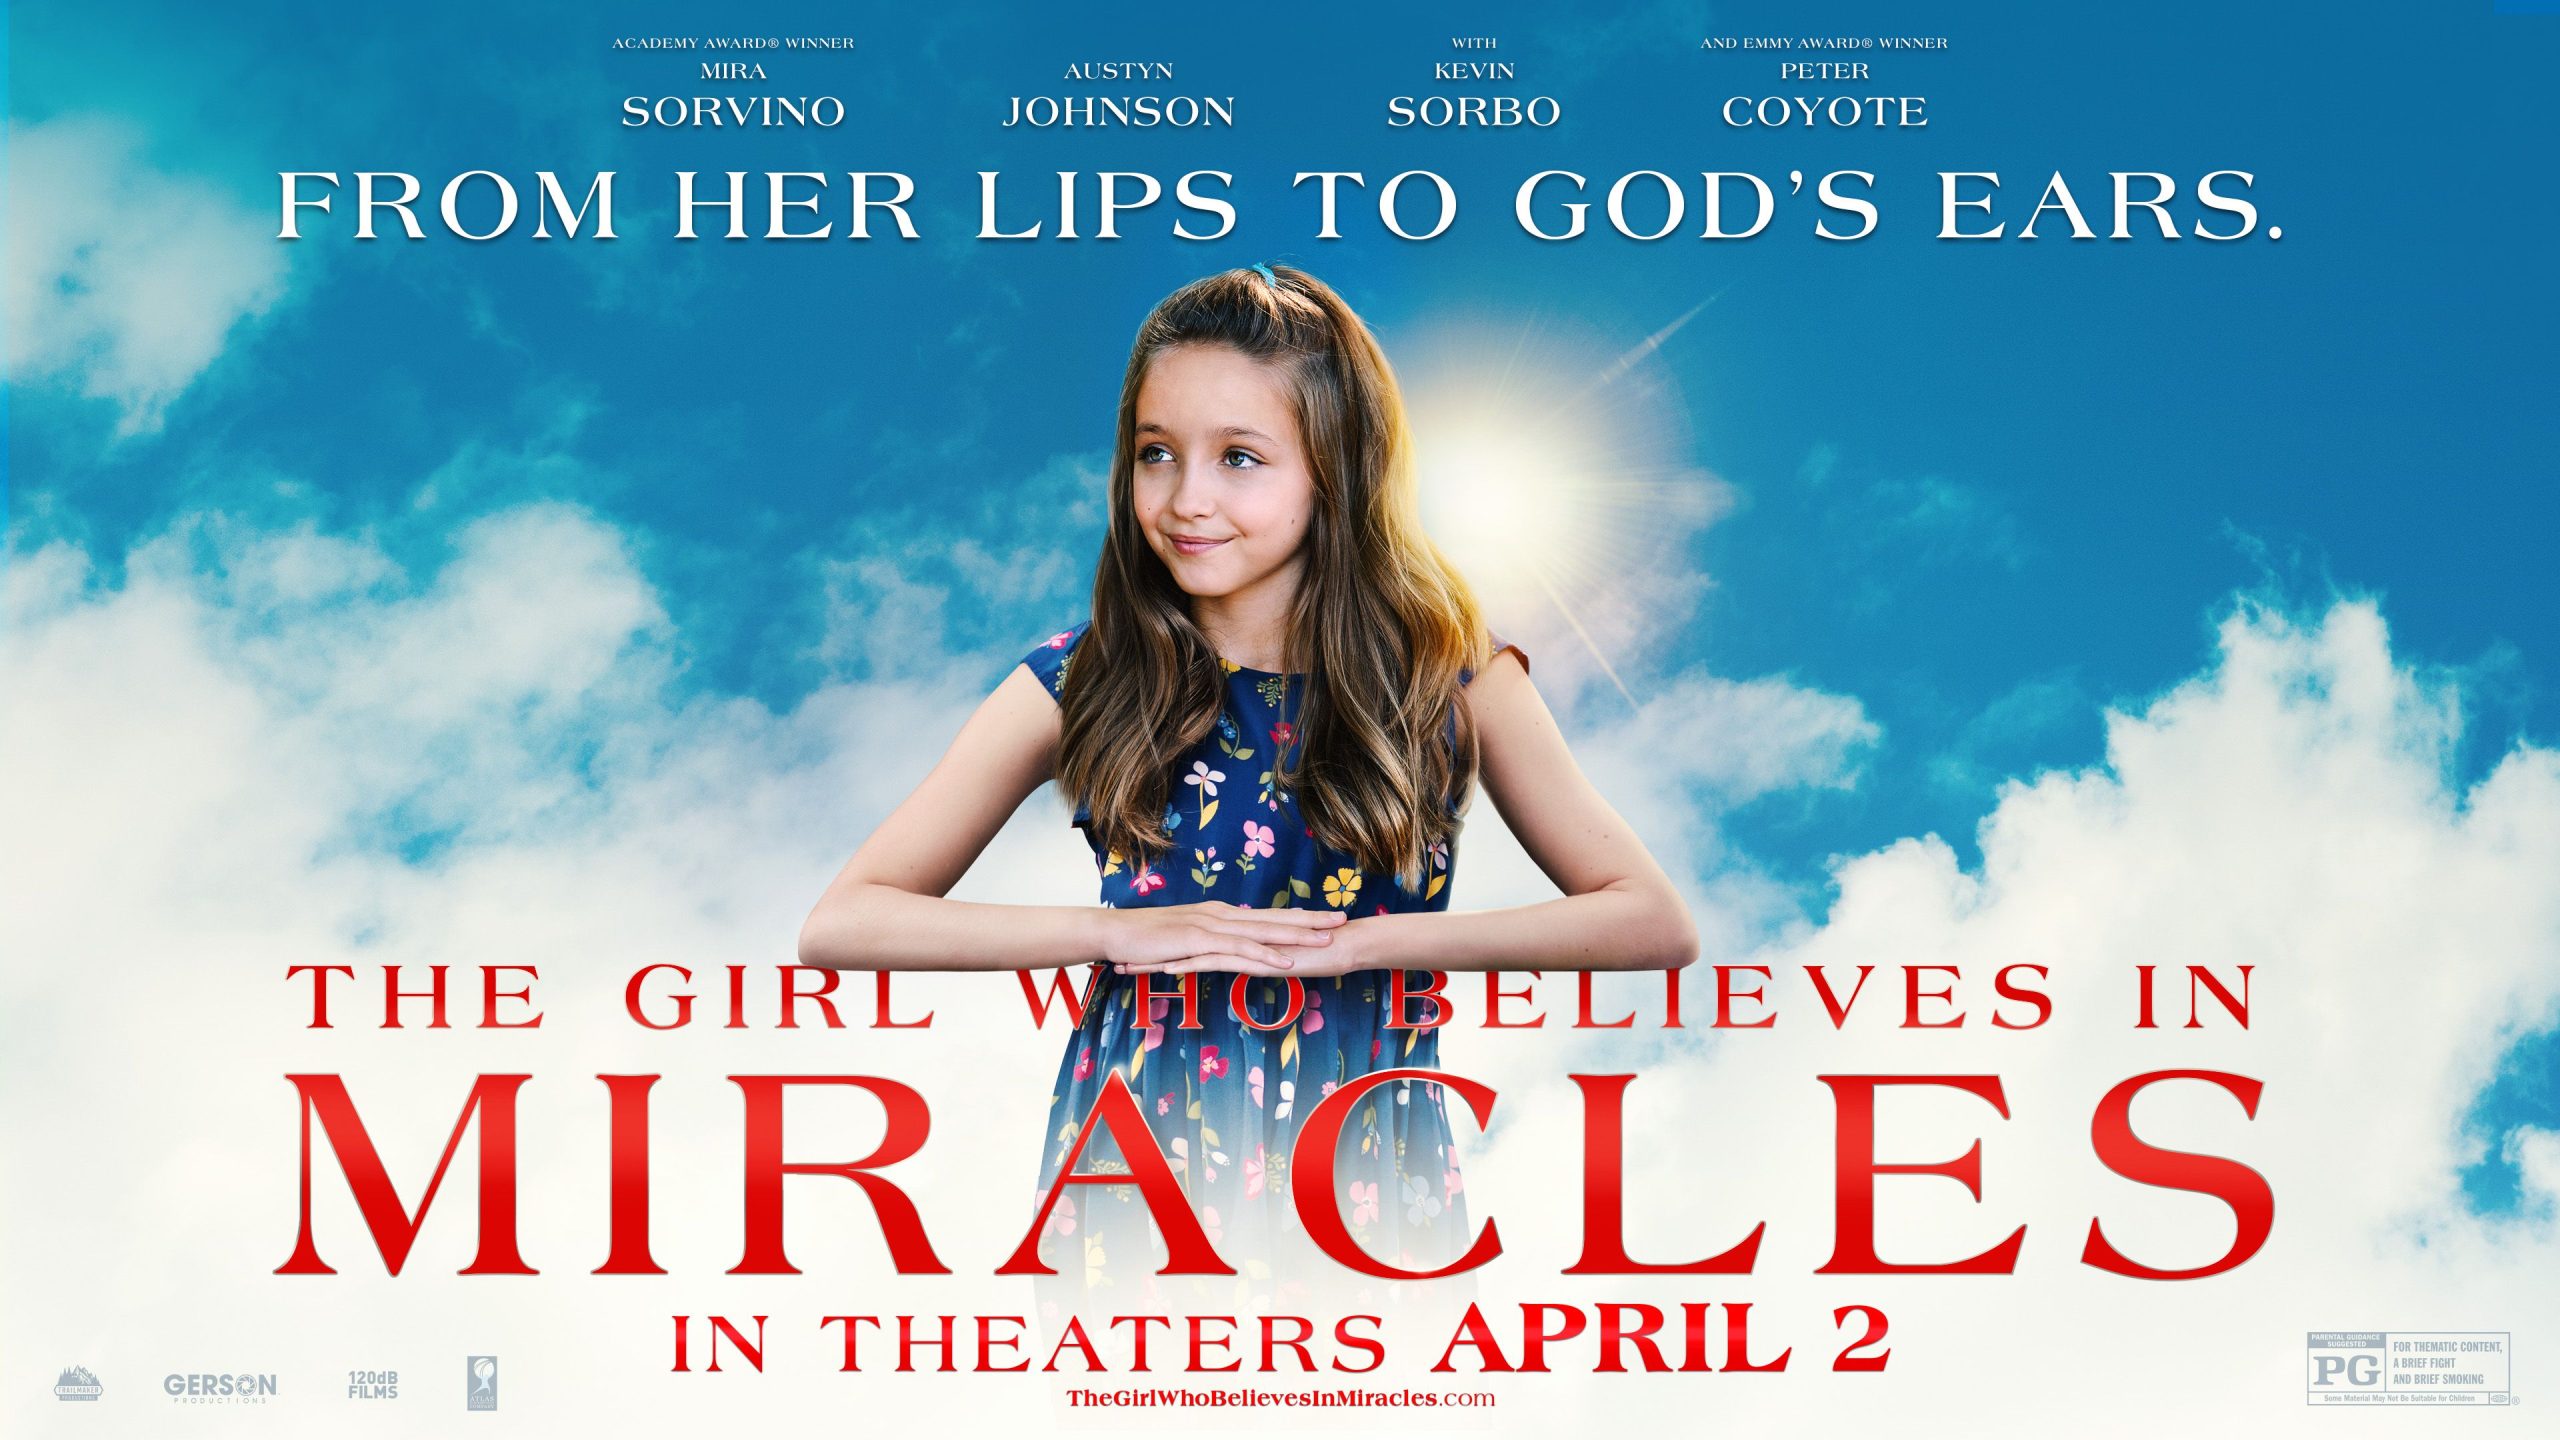 Faith Based Film The Girl Who Believes In Miracles Starring Austyn Johnson Gets April